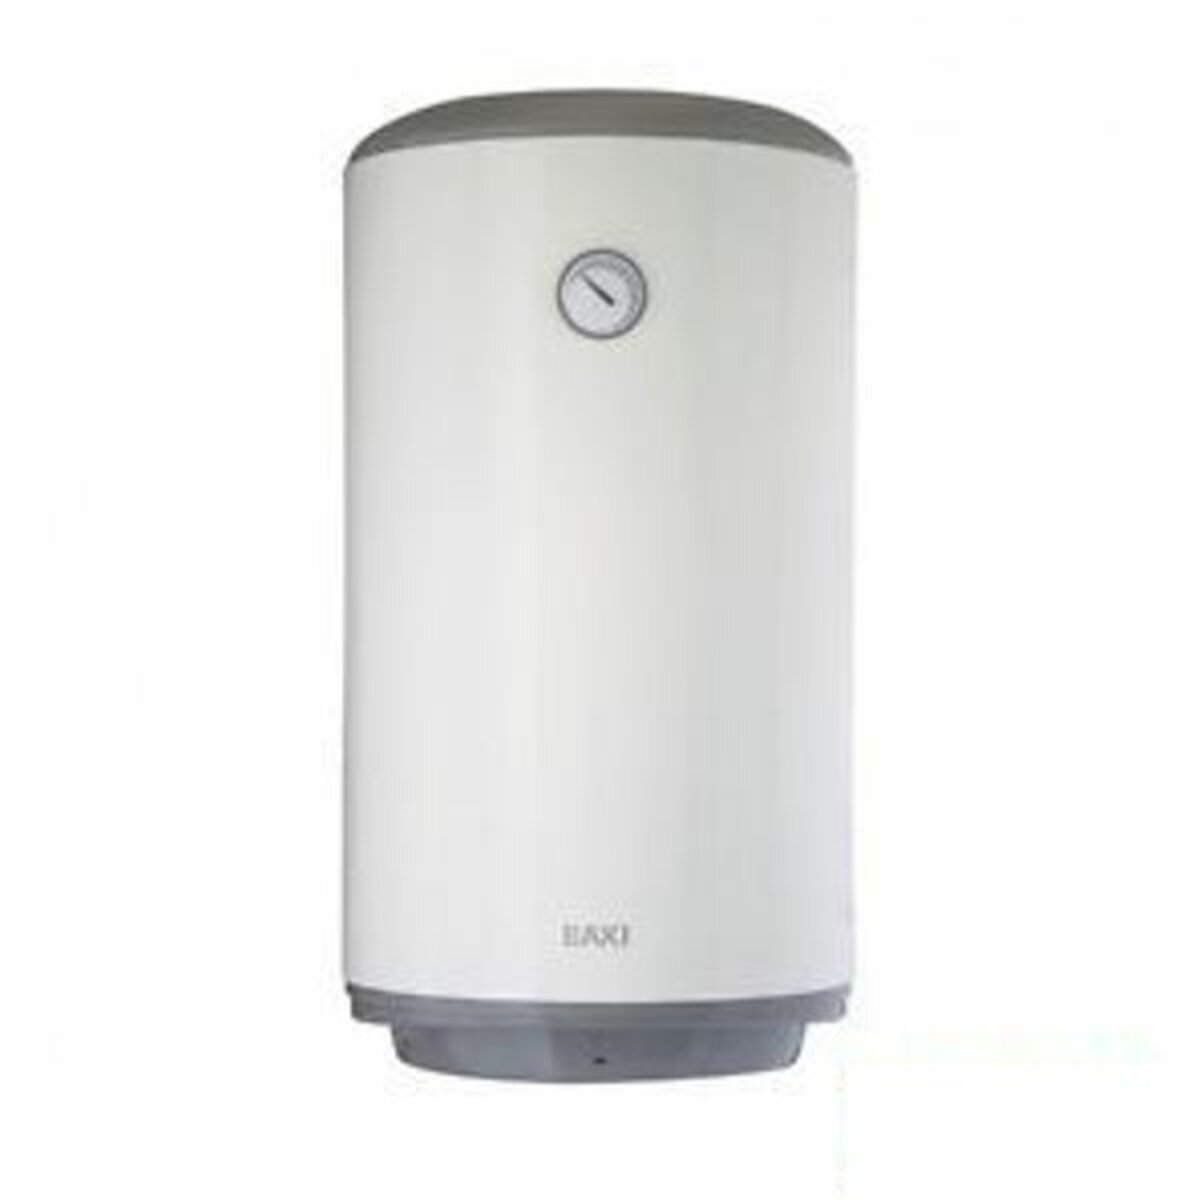 Electric water heater Must + line Baxi v530 30 liters 5 years